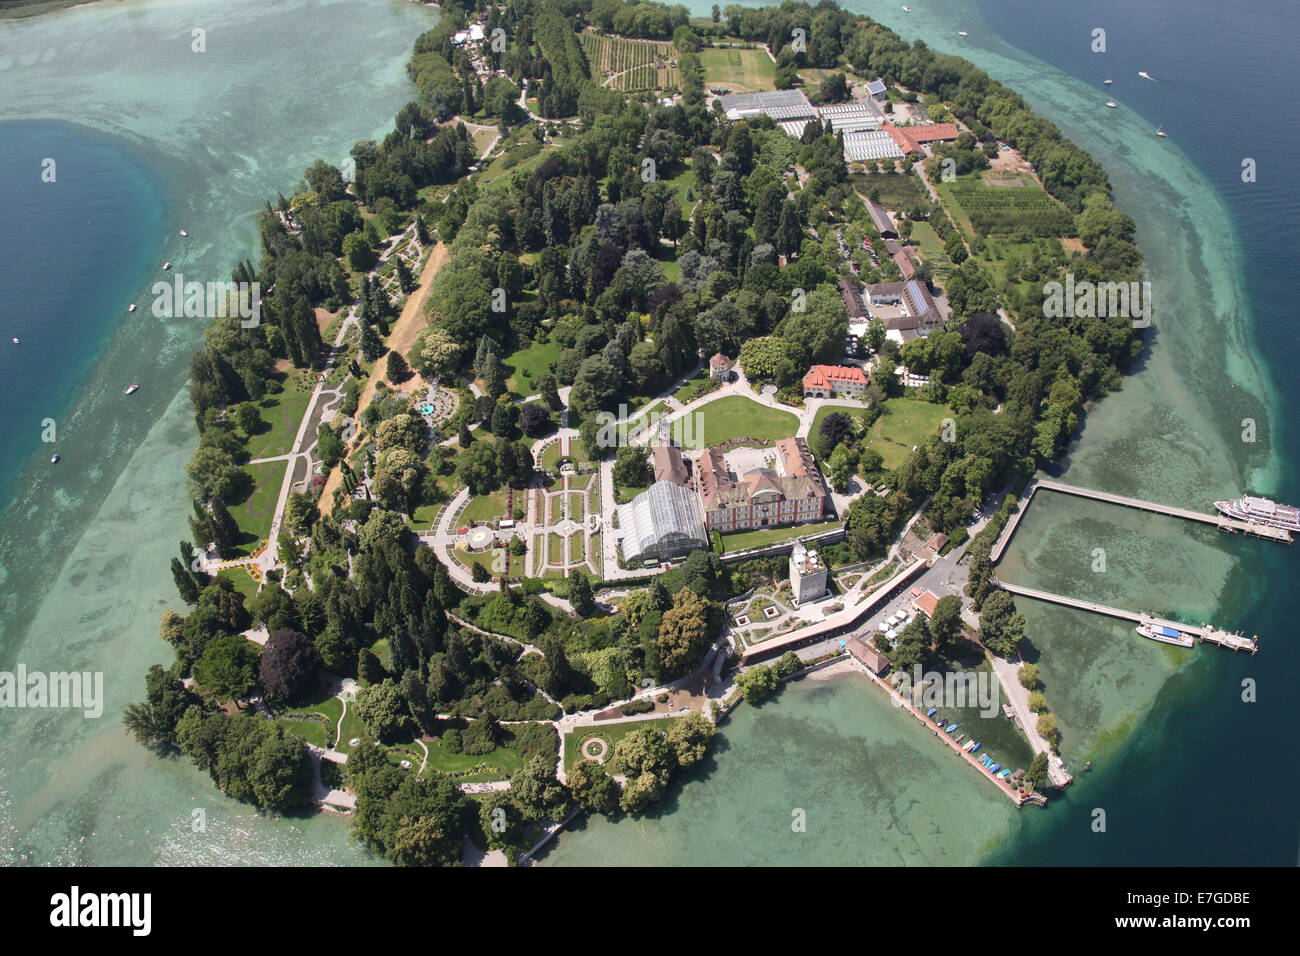 27.06.2014, Isle of Mainau, Island of Flowers with Park and Castle, owned by the Swedish-born aristocratic family Bernadotte. Stock Photo